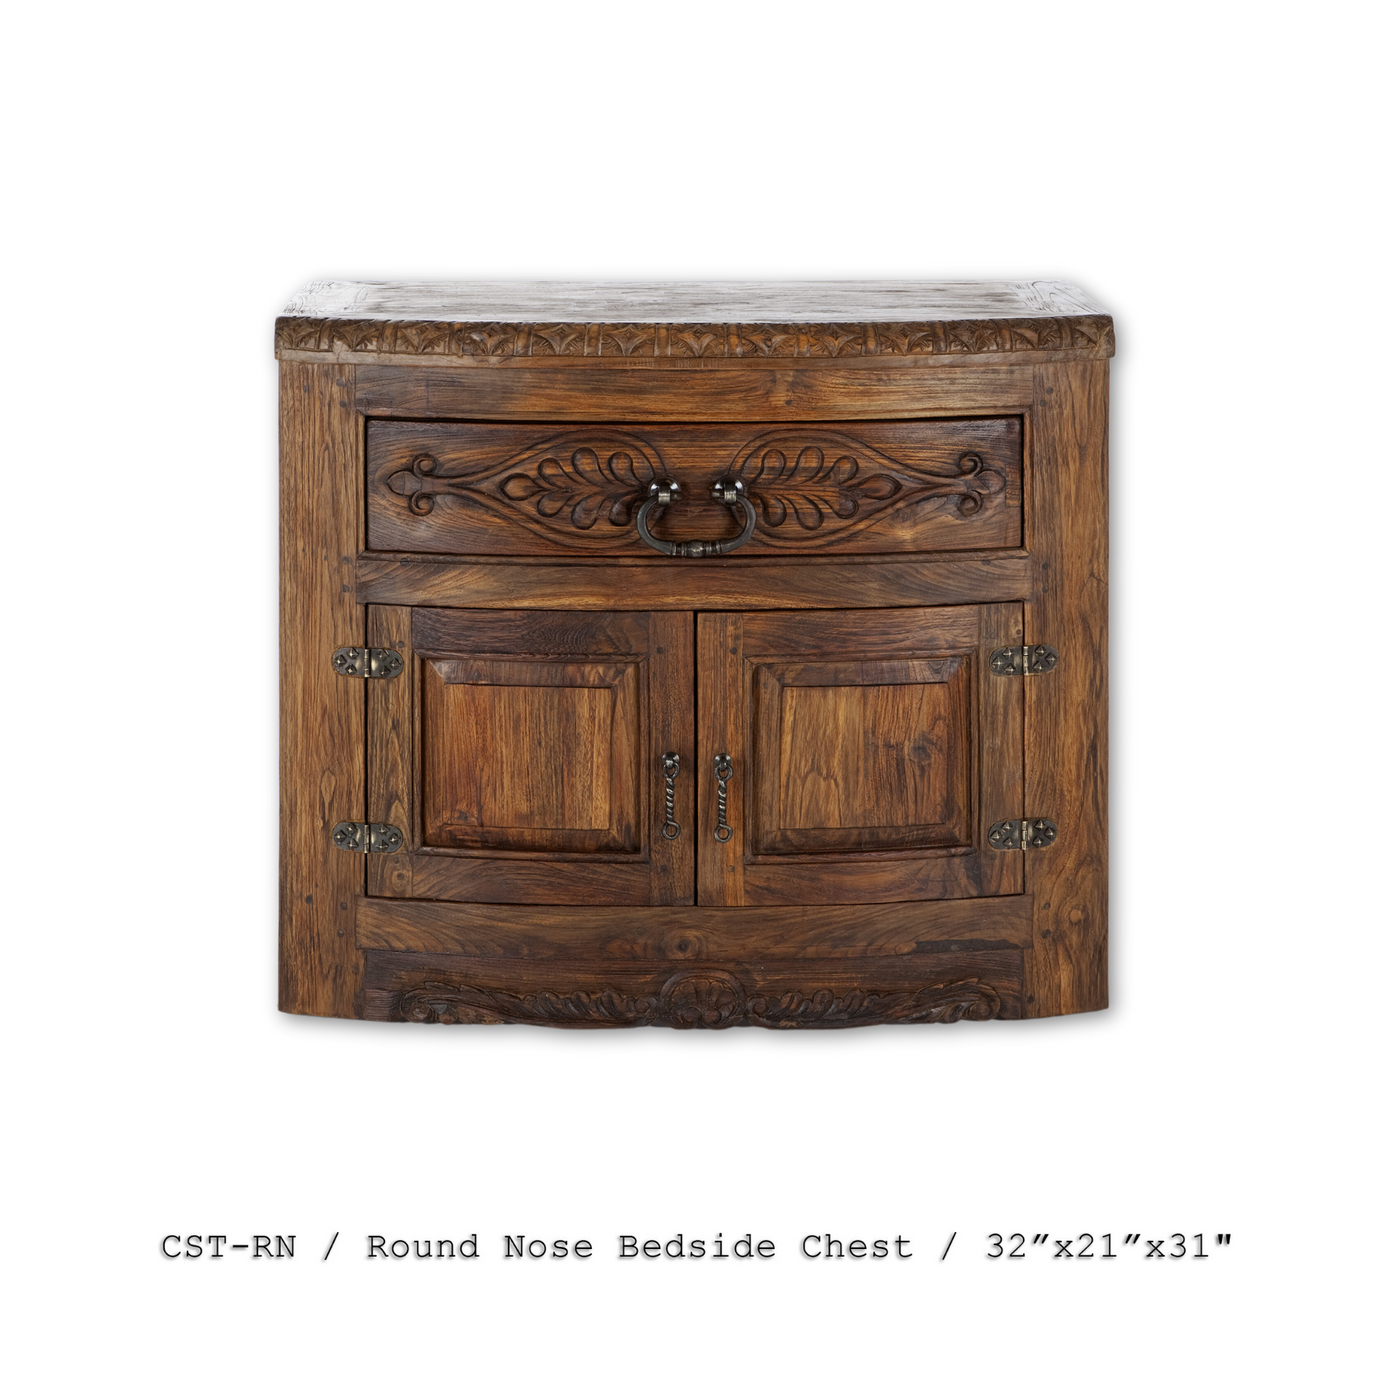 Round Nose Bedside Chest